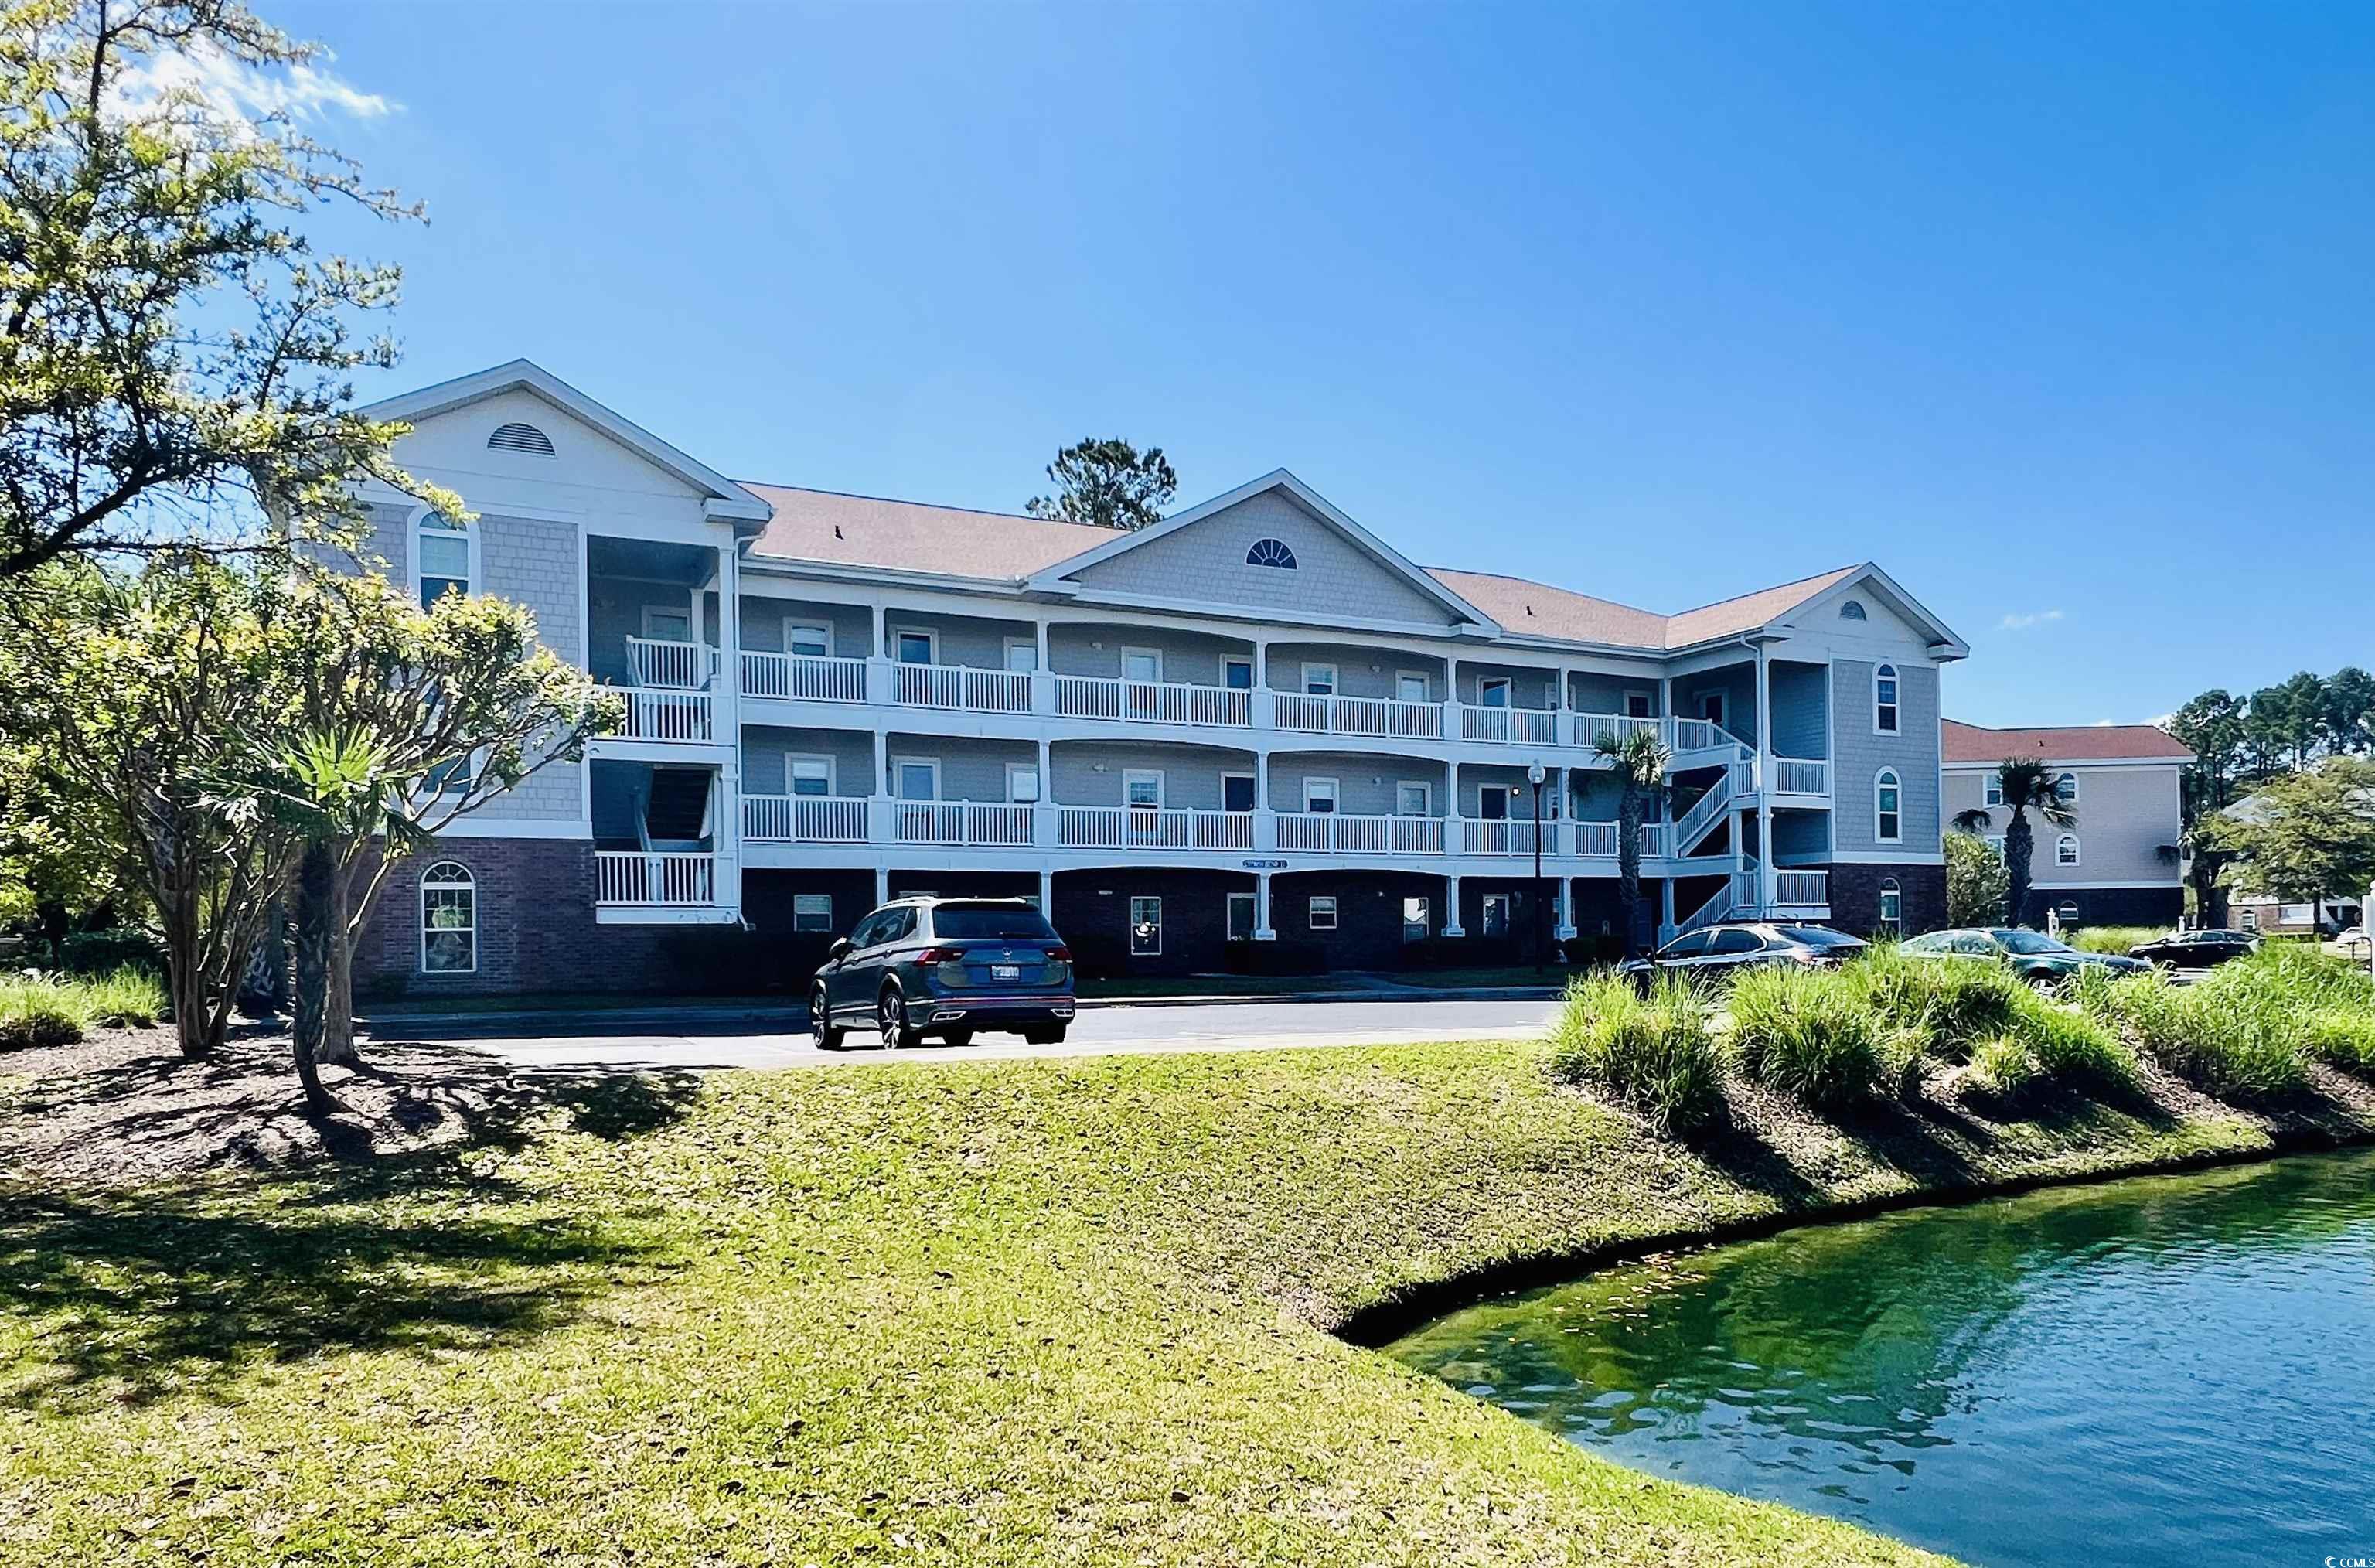 rare opportunity to own a fully renovated first floor corner unit!  this stunning 3 bedroom 2 full bath condo is located in the sought after barefoot resort and golf community with 4 championship golf courses, a marina, resort style pools and hot tub located on the intracoastal waterway, as well as multiple onsite restaurants.  in addition to all of this, there is an exclusive multimillion dollar 3 story oceanfront beach cabana with complimentary shuttle transportation or free beach parking for owners.  this luxurious condo is located approximately 2 miles away from the private beach access as well as some of the best bars, shops and restaurants of north myrtle beach.  the interior of the condo offers a clean and cozy design, beautiful lvp floors, full smart home system including a nest thermostat, ring doorbell and lockly door lock system...all controlled from your phone, gourmet kitchen including stainless steel appliances, tile backsplash, granite countertops and soft close doors and drawers.  don't forget the home comes mostly furnished and is all mostly like new.  fantastic views of the norman golf course are enjoyed on the tiled screened in rear porch and a pond with water features when you walk out your front door.  pool and grilling area are also only a few steps away.  this condo will provide as a perfect primary residence, second home or investment opportunity for short and long term rentals.  reach out to your trusted realtor partner to schedule your showing today!